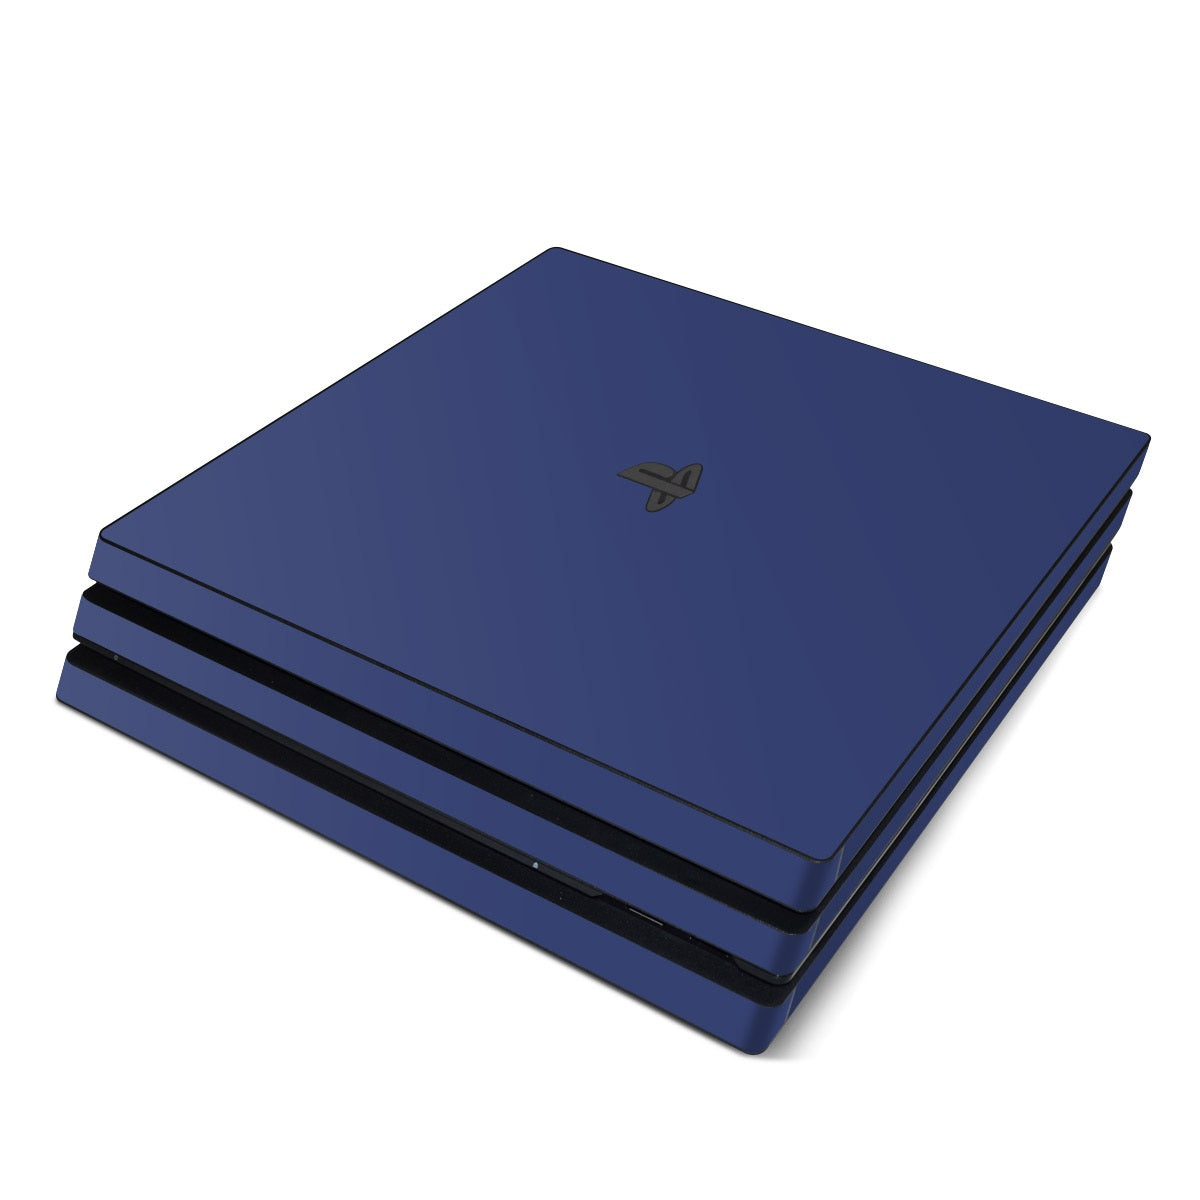 Solid State Cobalt - Sony PS4 Pro Skin